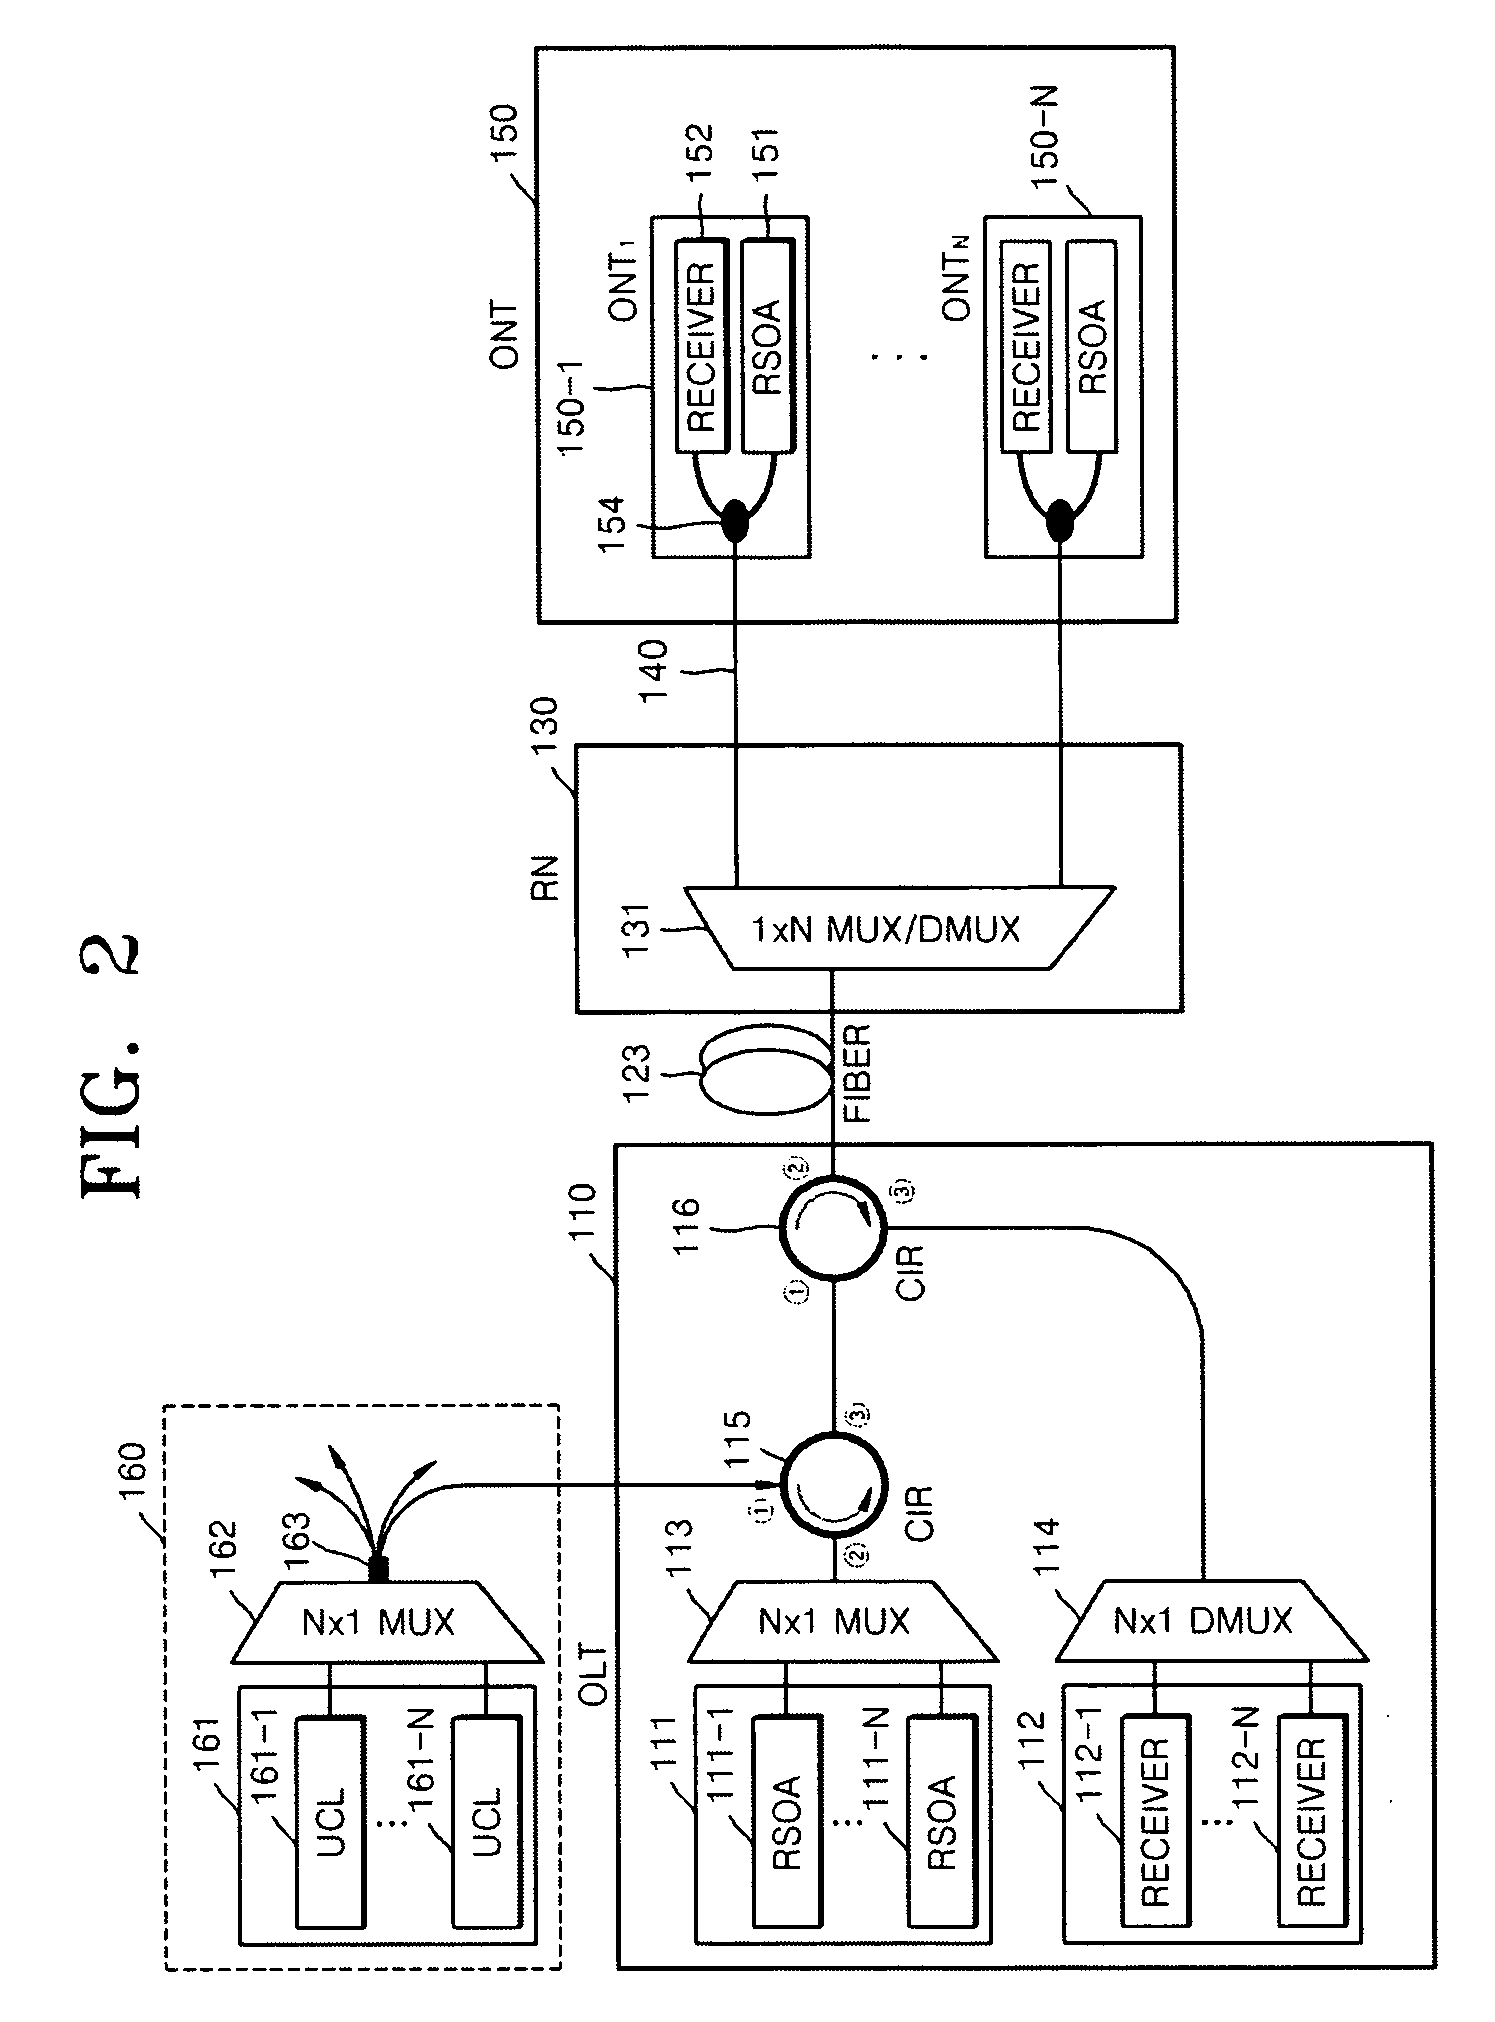 Passive optical network based on reflective semiconductor optical amplifier